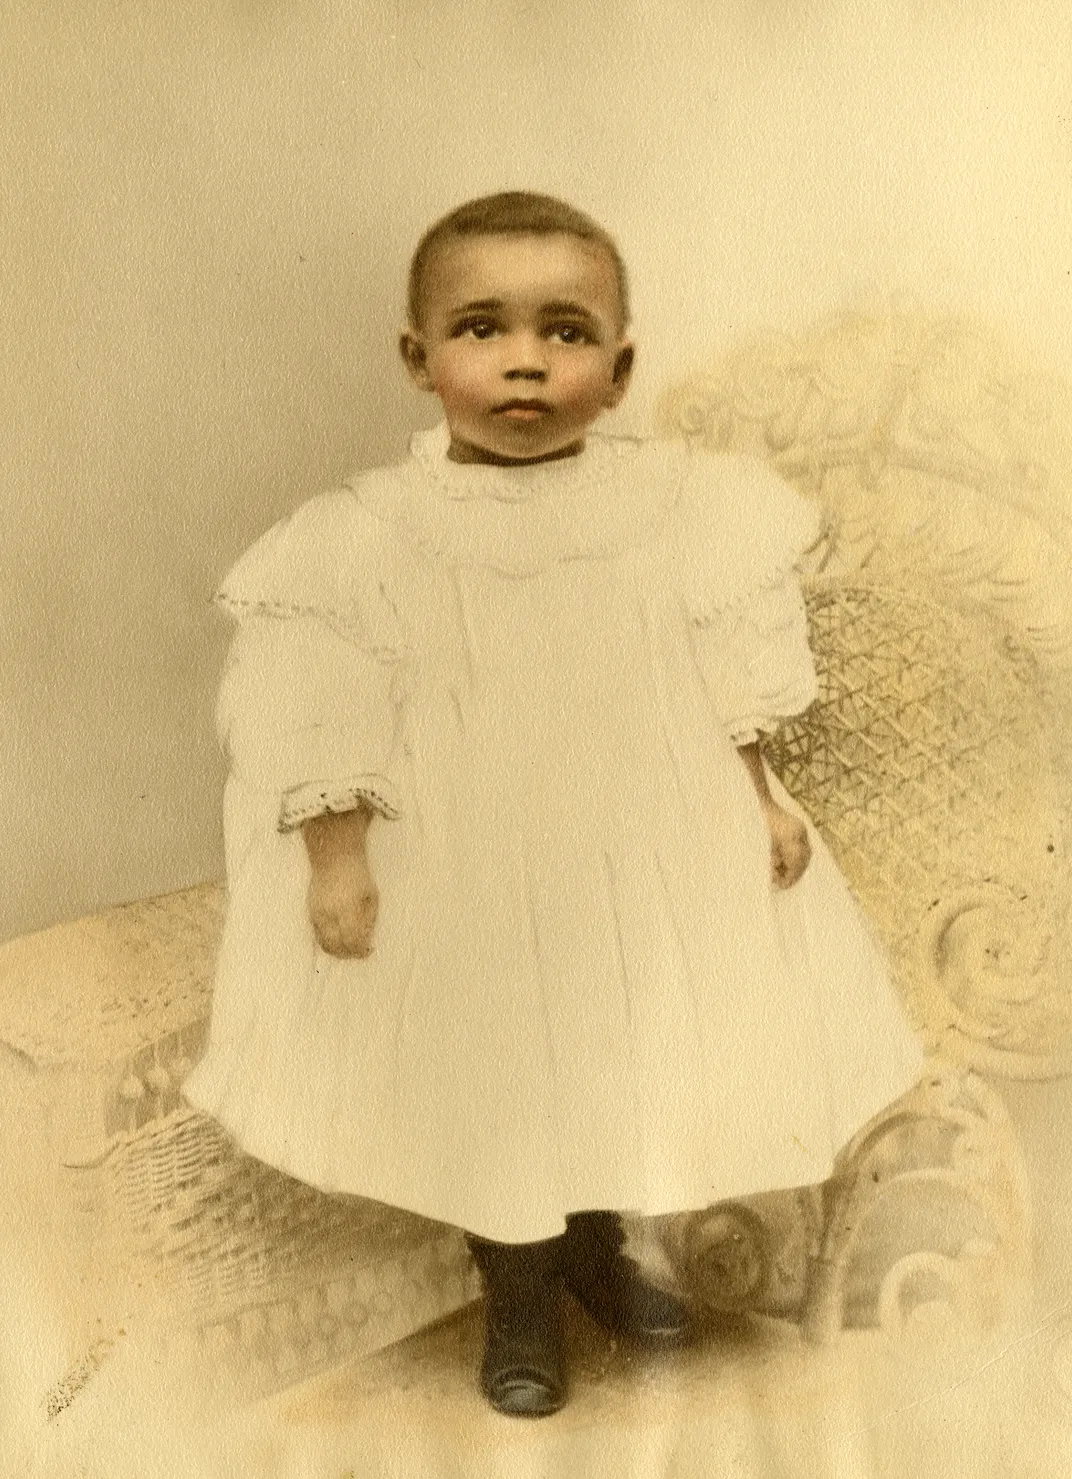 Anderson as a child